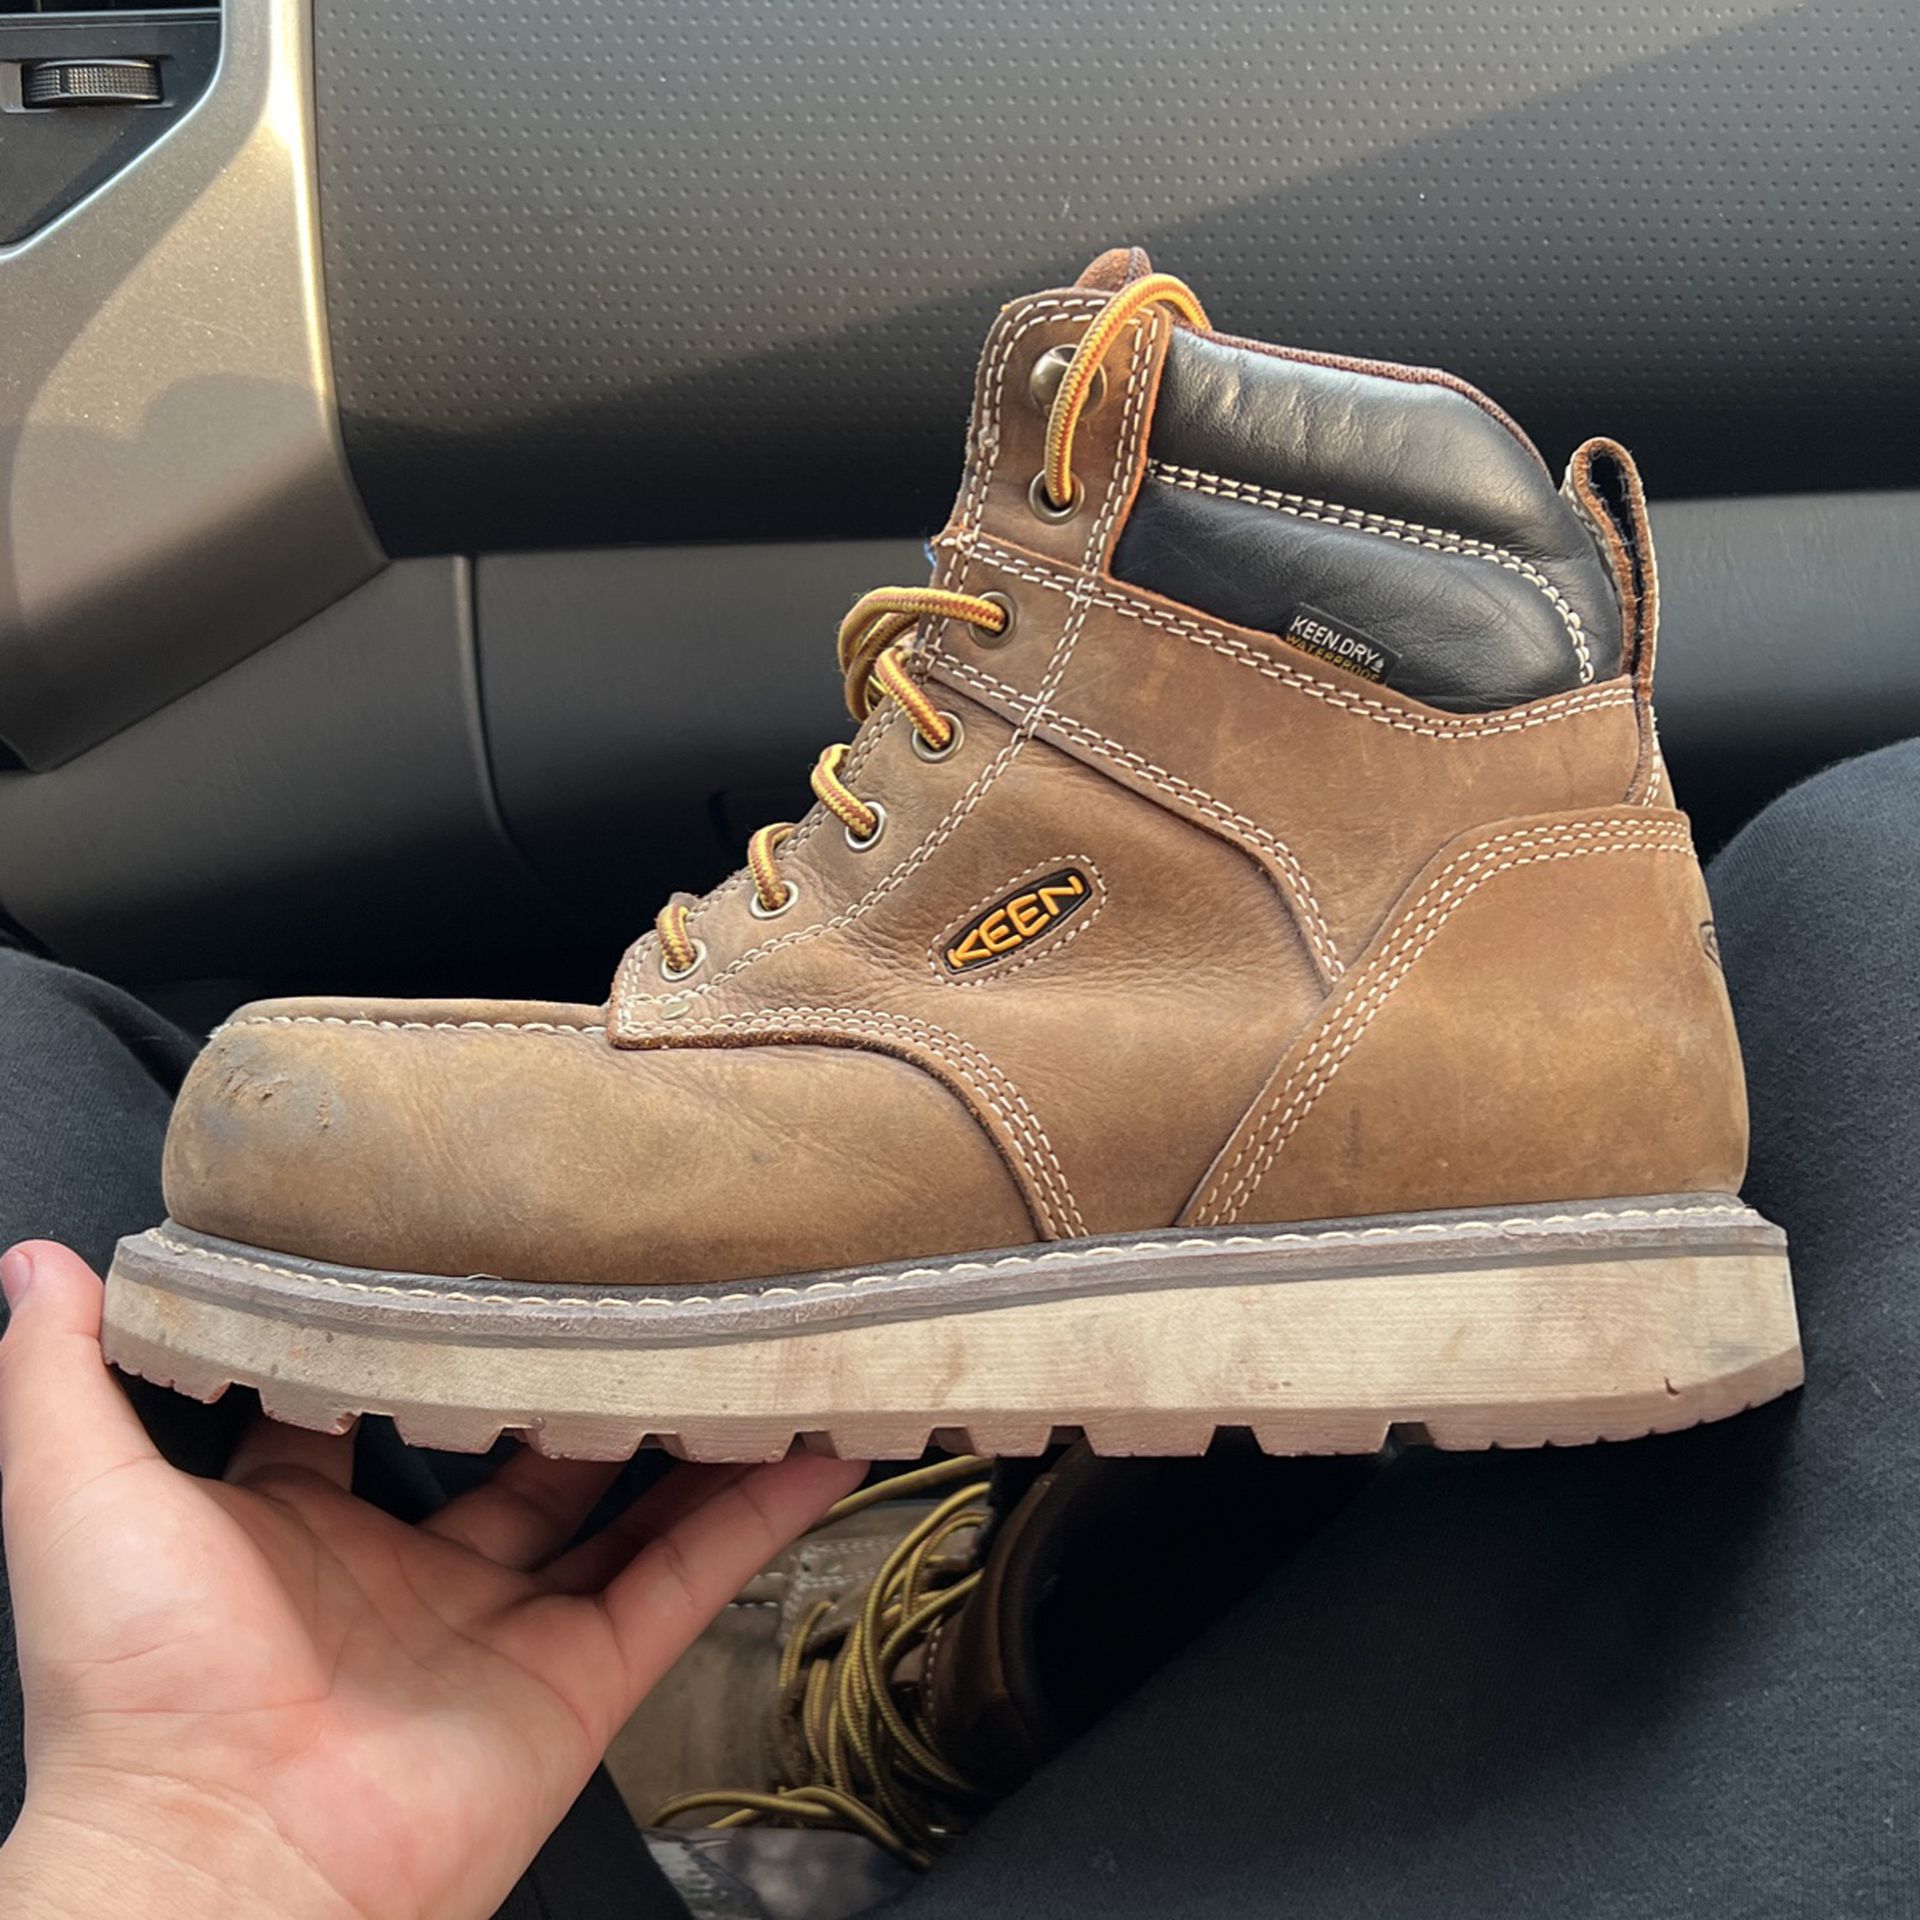 KEEN work boots size 9.5